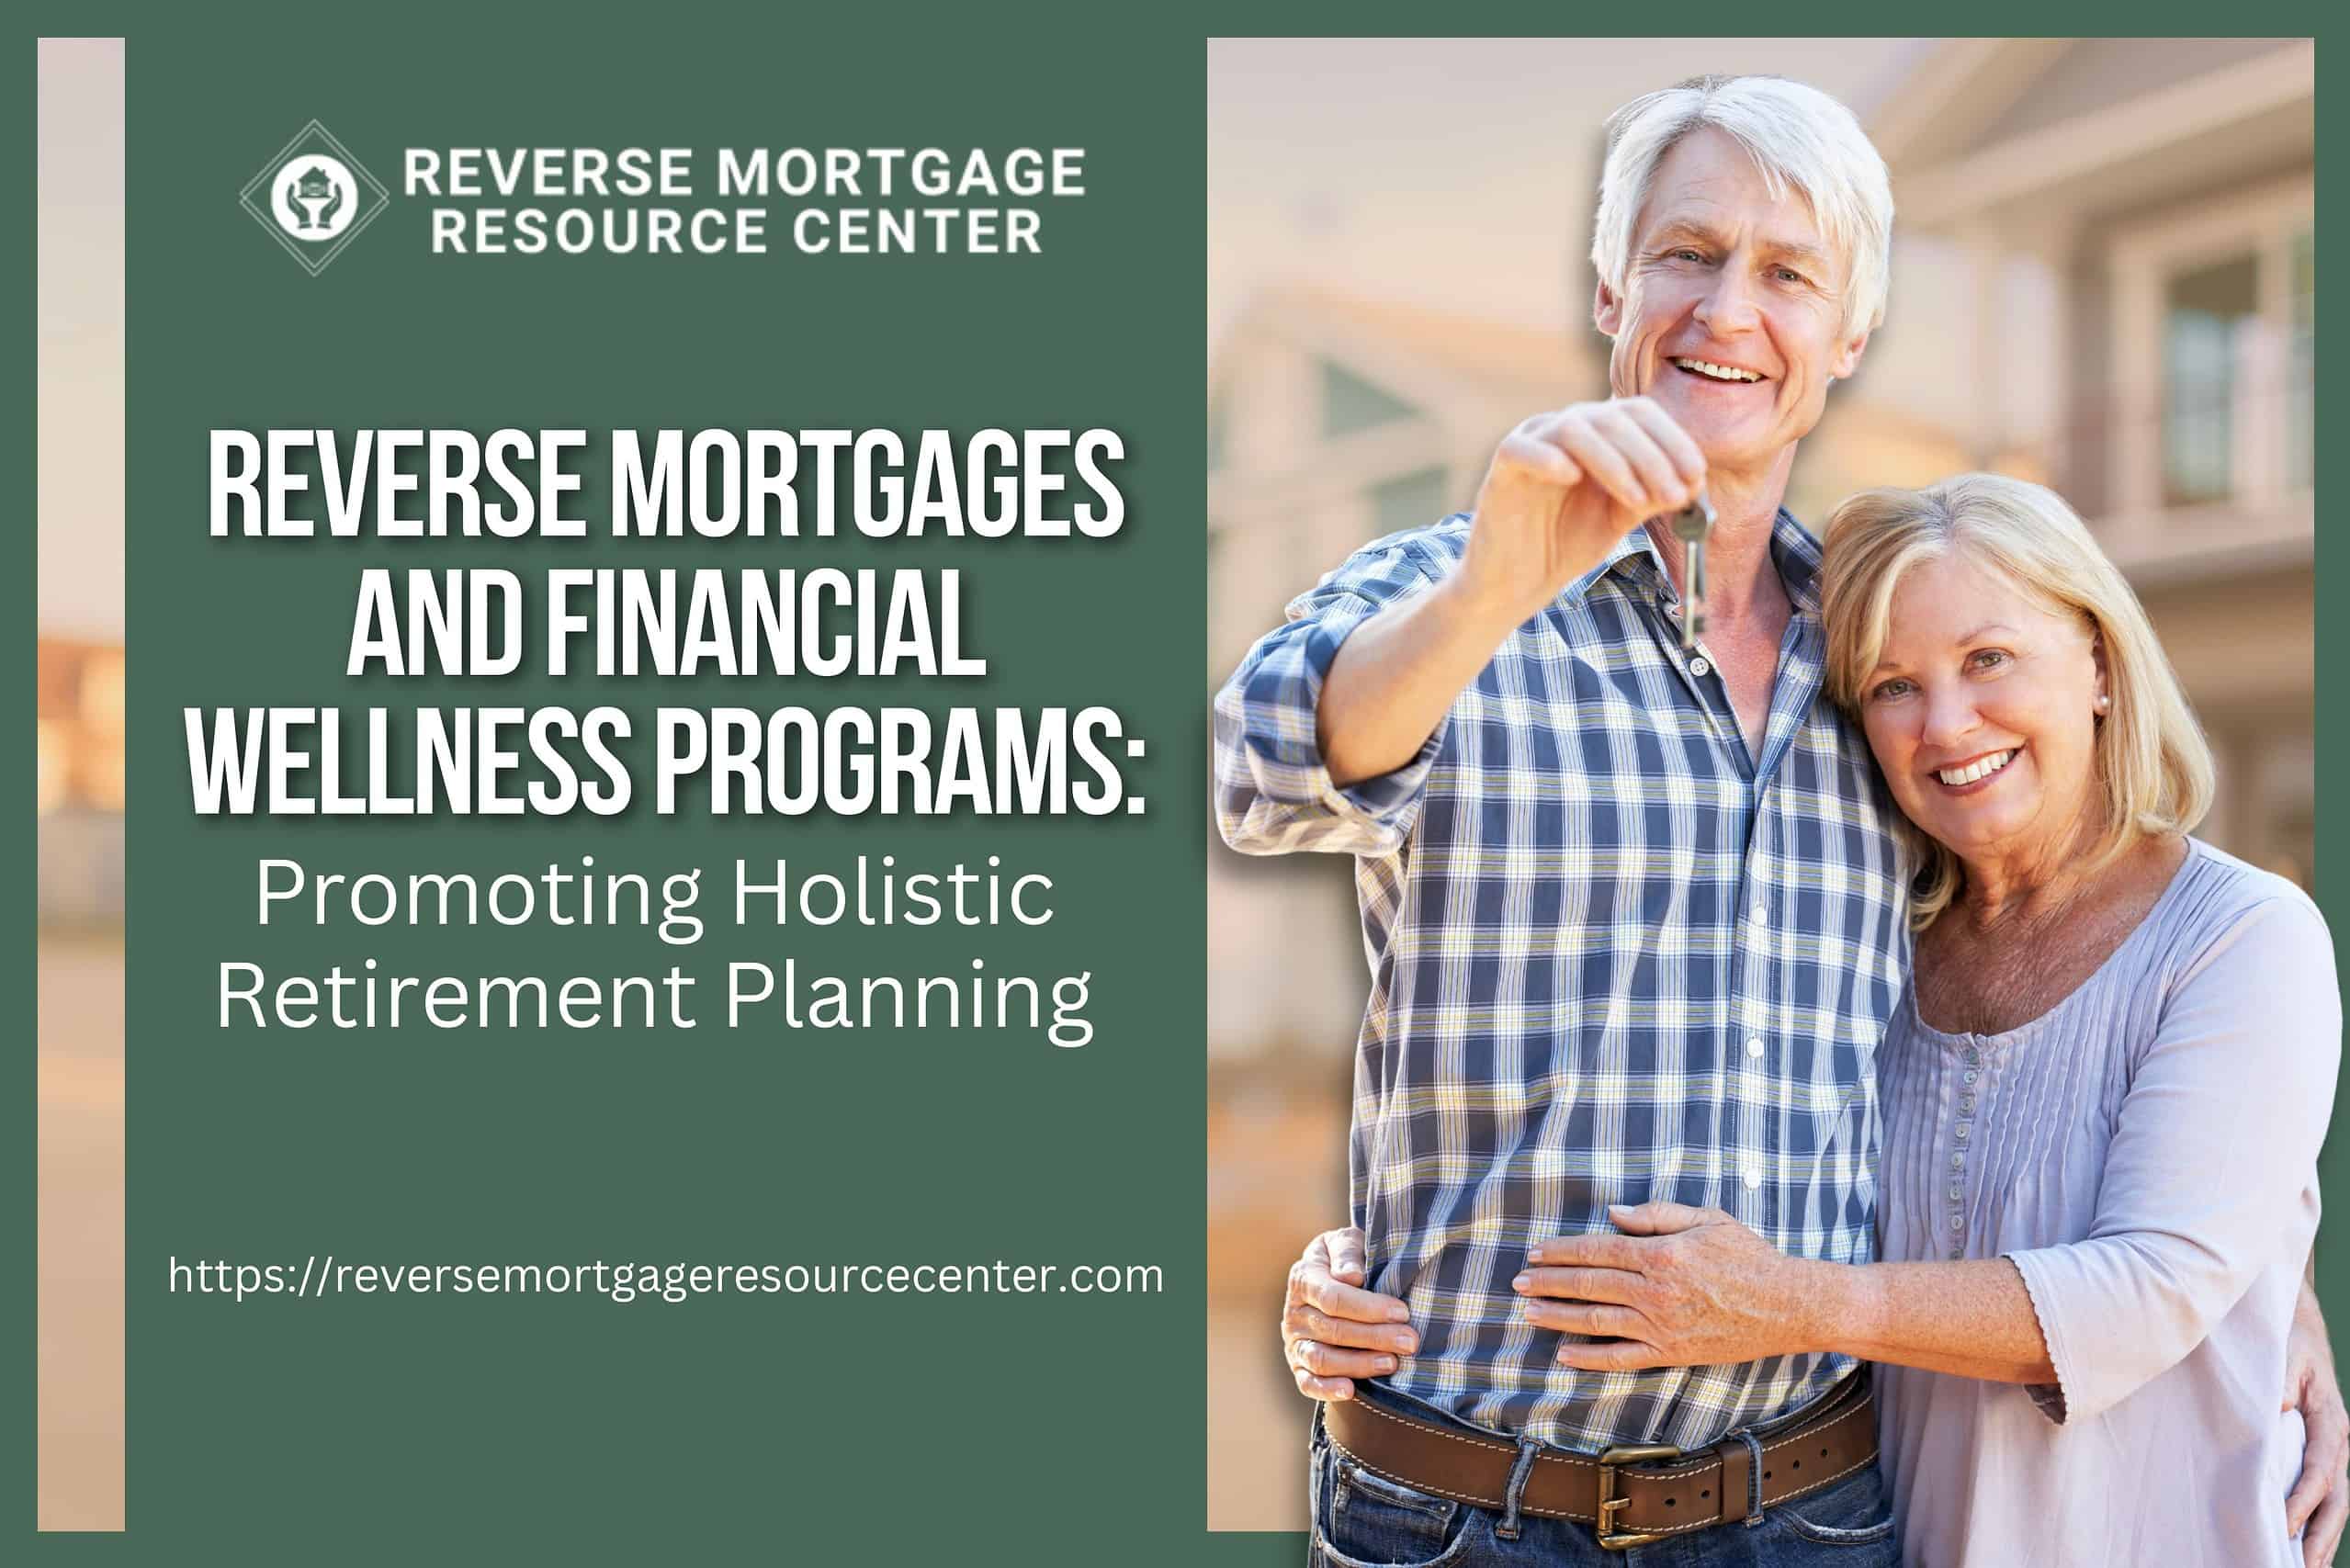 Reverse Mortgages and Financial Wellness Programs Promoting Holistic Retirement Planning